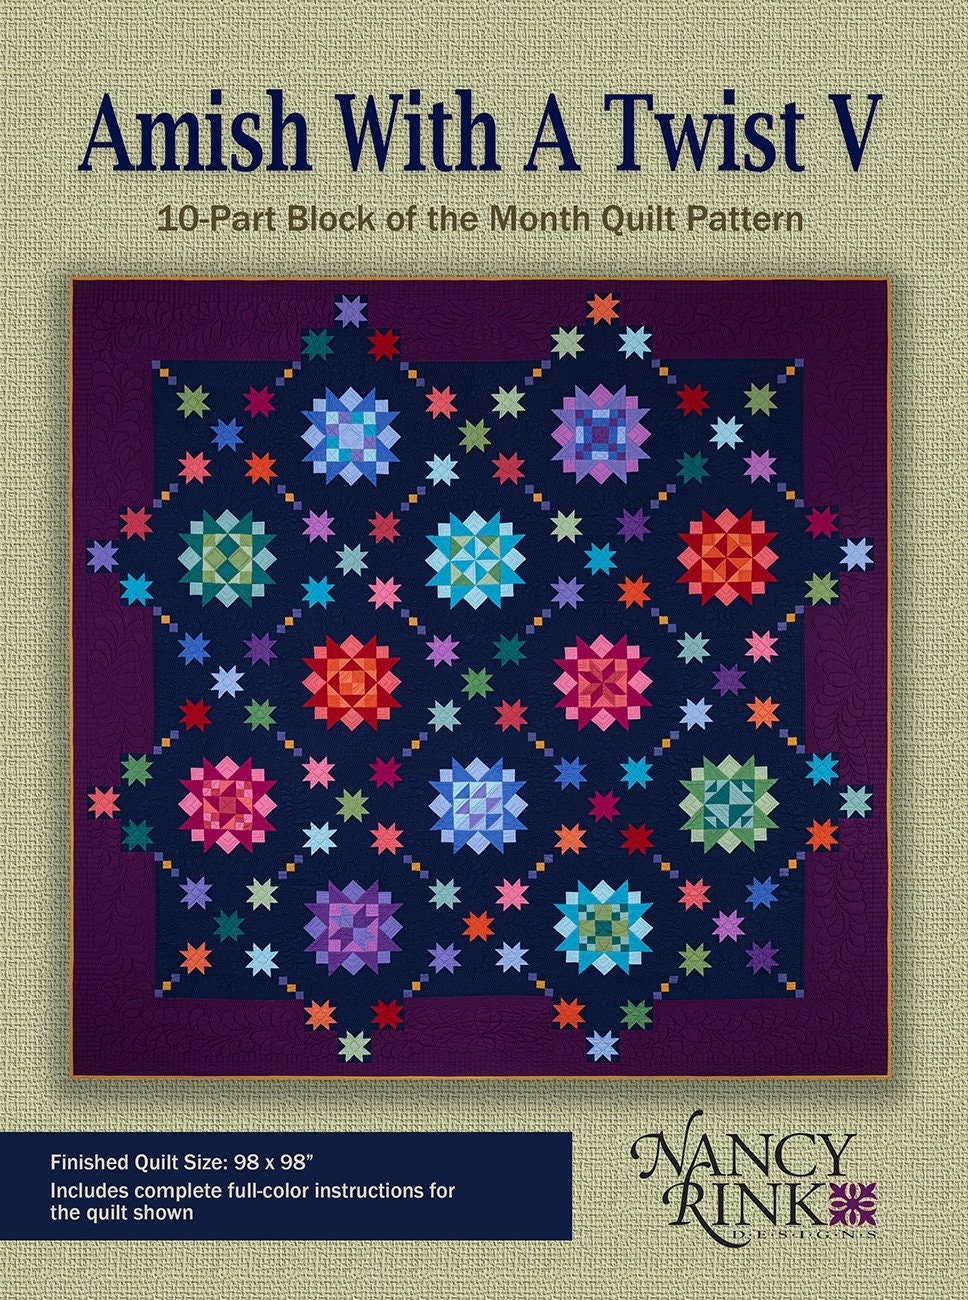 Amish and Mennonite style quilting frame~ Sarah's Country Kitchen ~